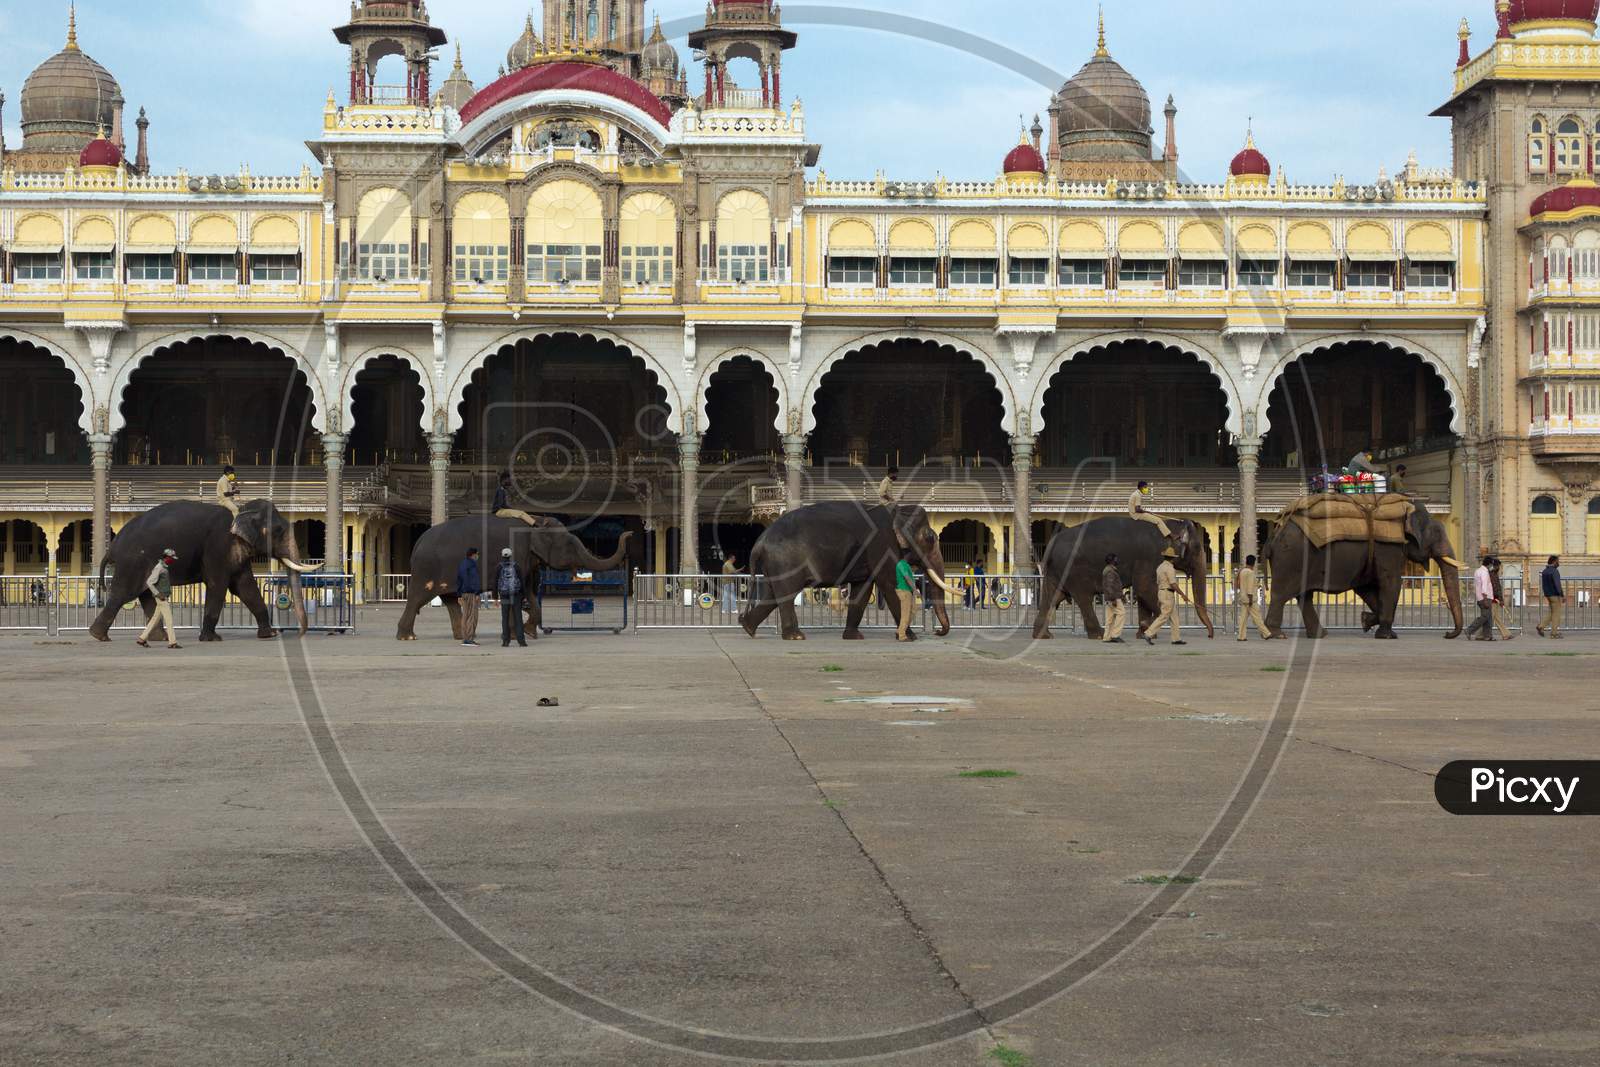 A Elegant view of the Elephants paraded during early morning for the Dasara festival rehearsal at Ambavilas Palace in Mysore city of Karnataka.